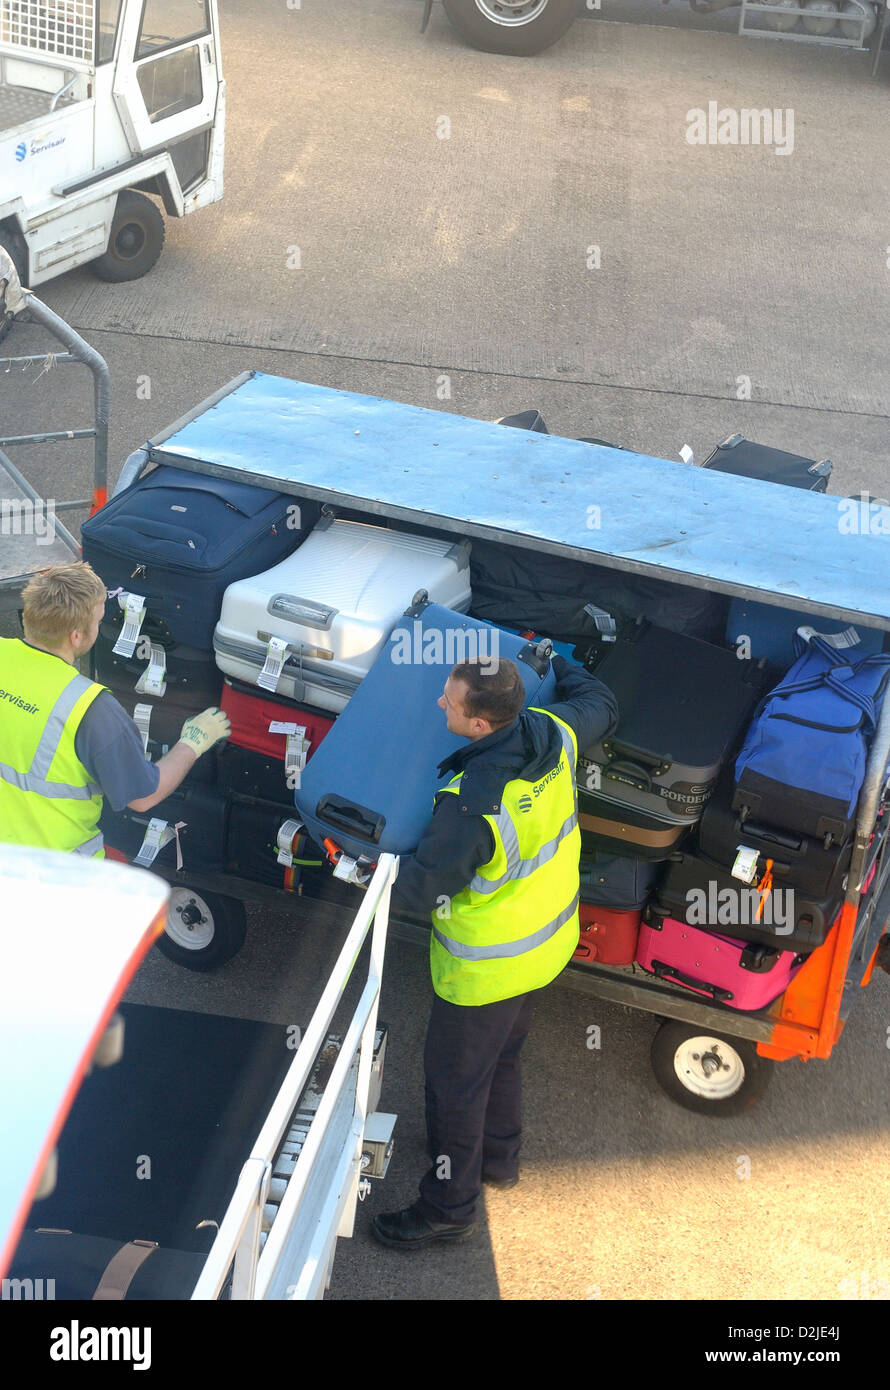 luggage being loaded at east midlands airport england uk Stock Photo